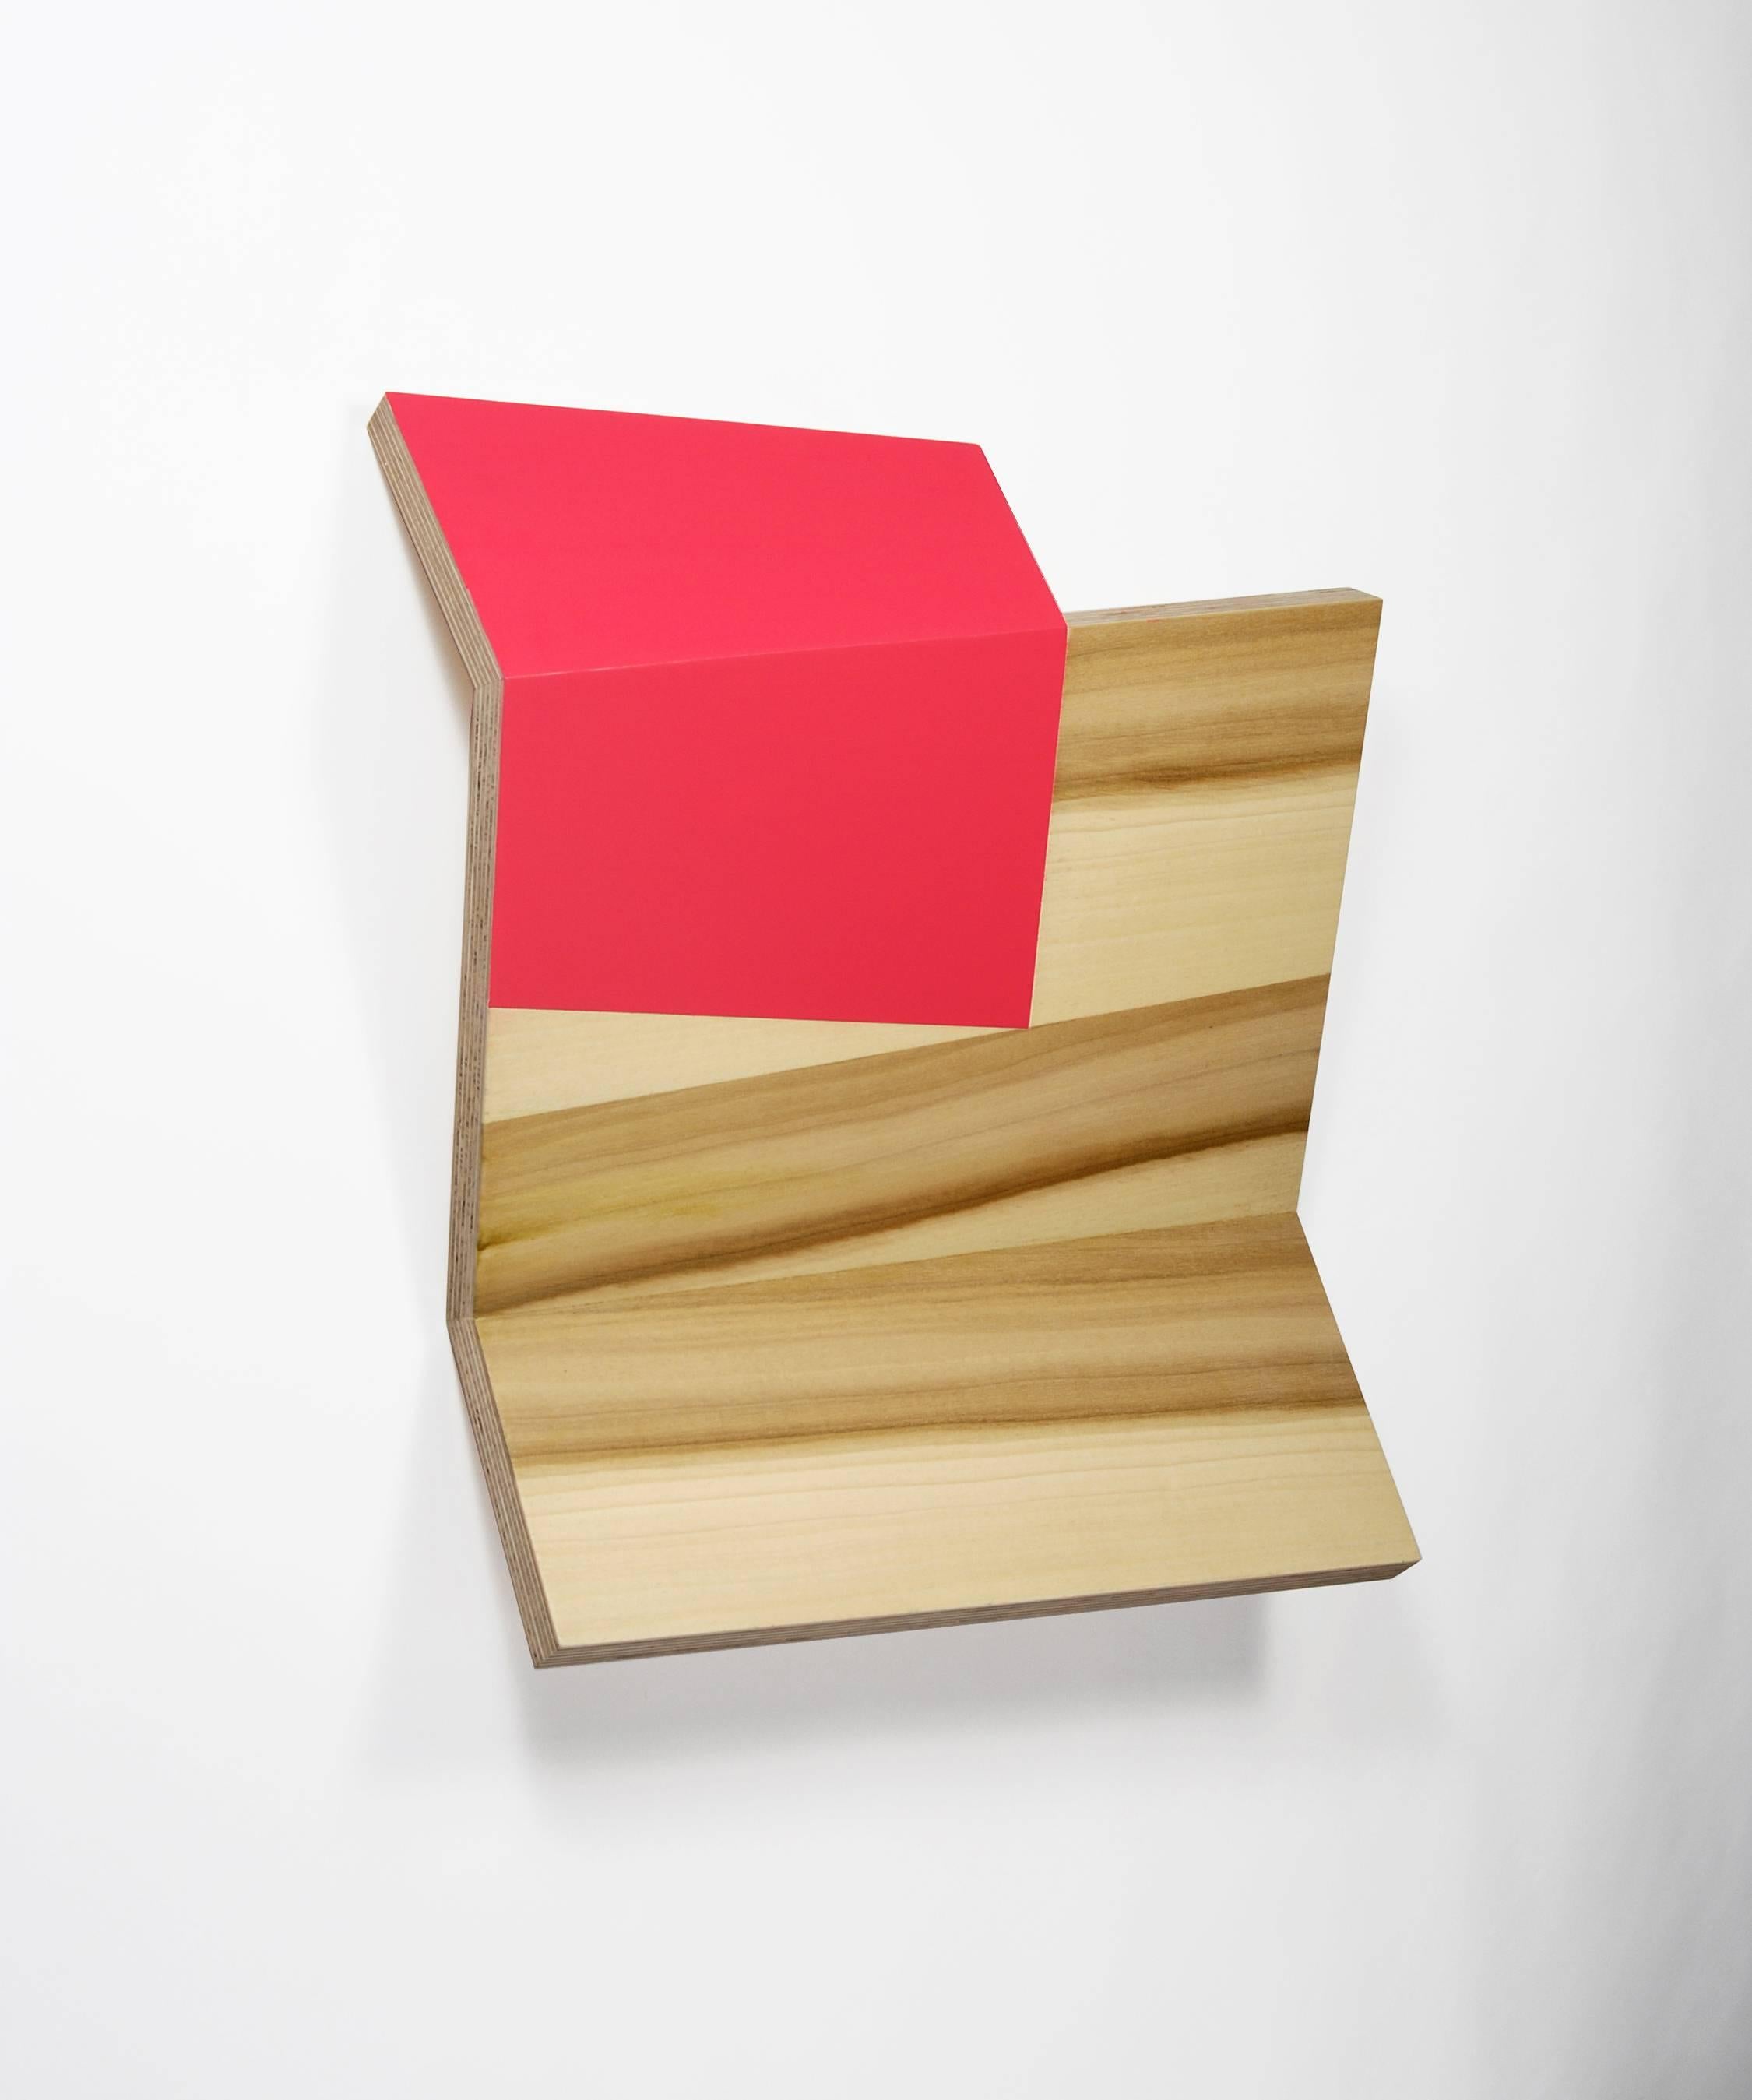 Architecture, functional objects and the human gestures that occur when interacting with these structures inform the vocabulary of Richard Bottwin’s sculpture.  The plywood surfaces, laminated with wood veneers or painted with acrylic colors, are